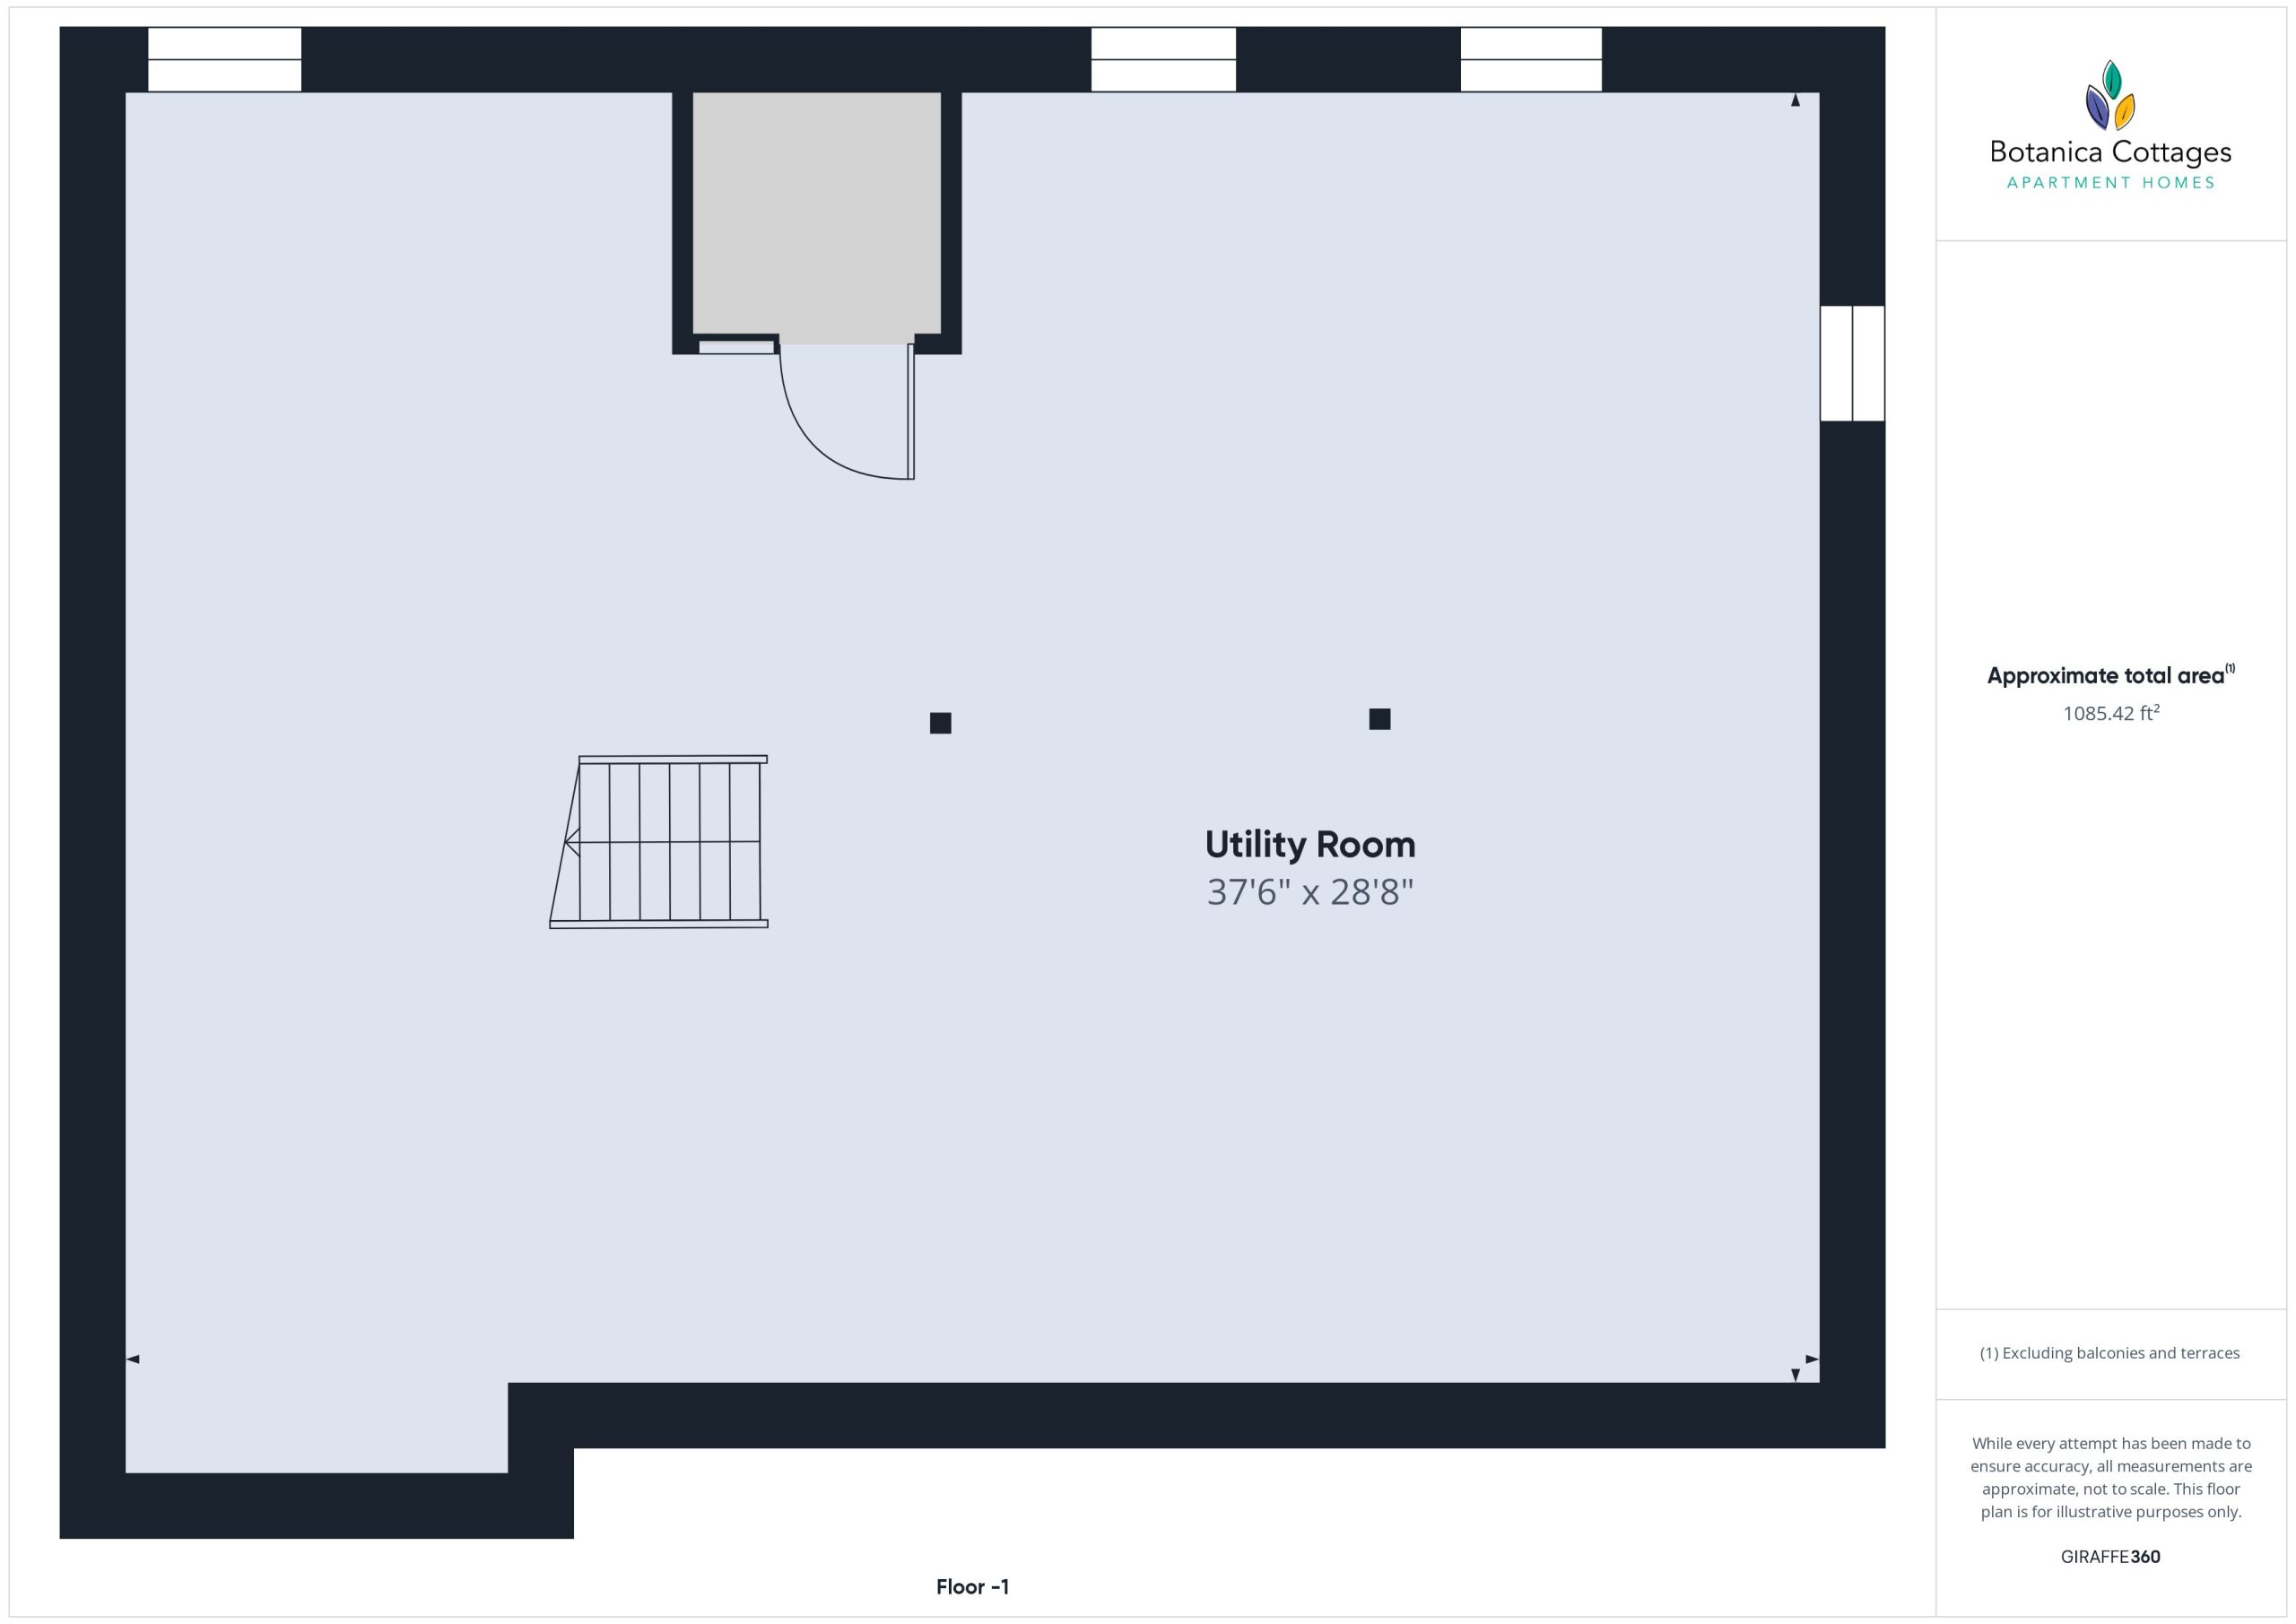 A floor plan of an apartment with two bedrooms and a bathroom.